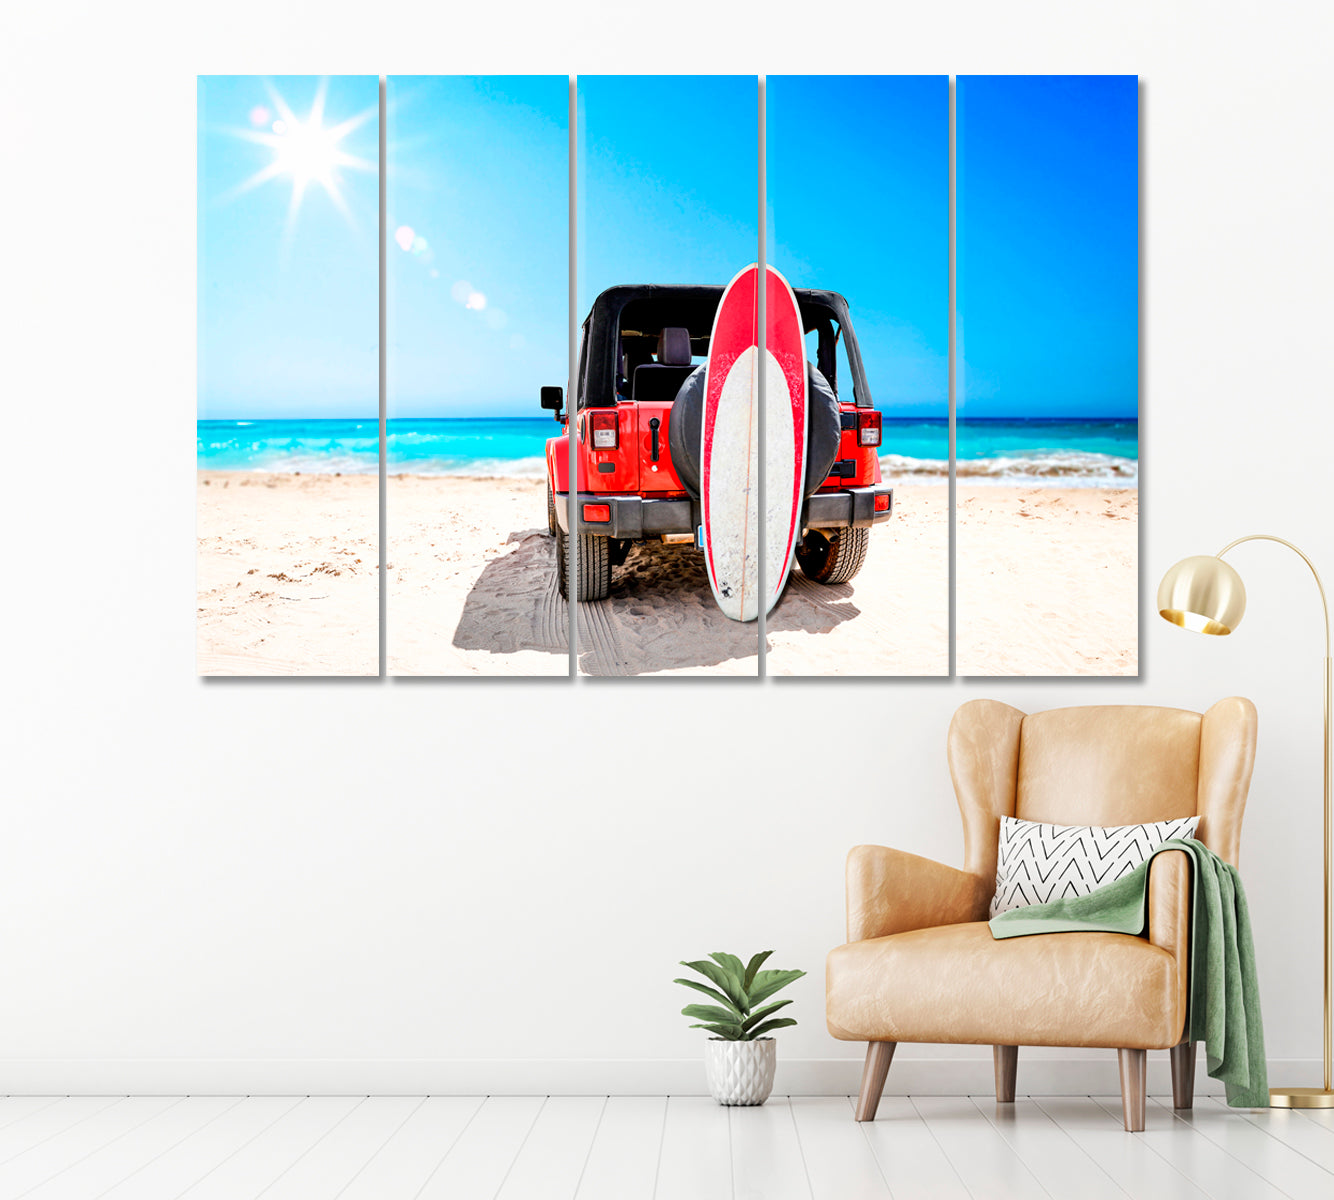 Summer Car with Surfer Board Canvas Print ArtLexy 5 Panels 36"x24" inches 